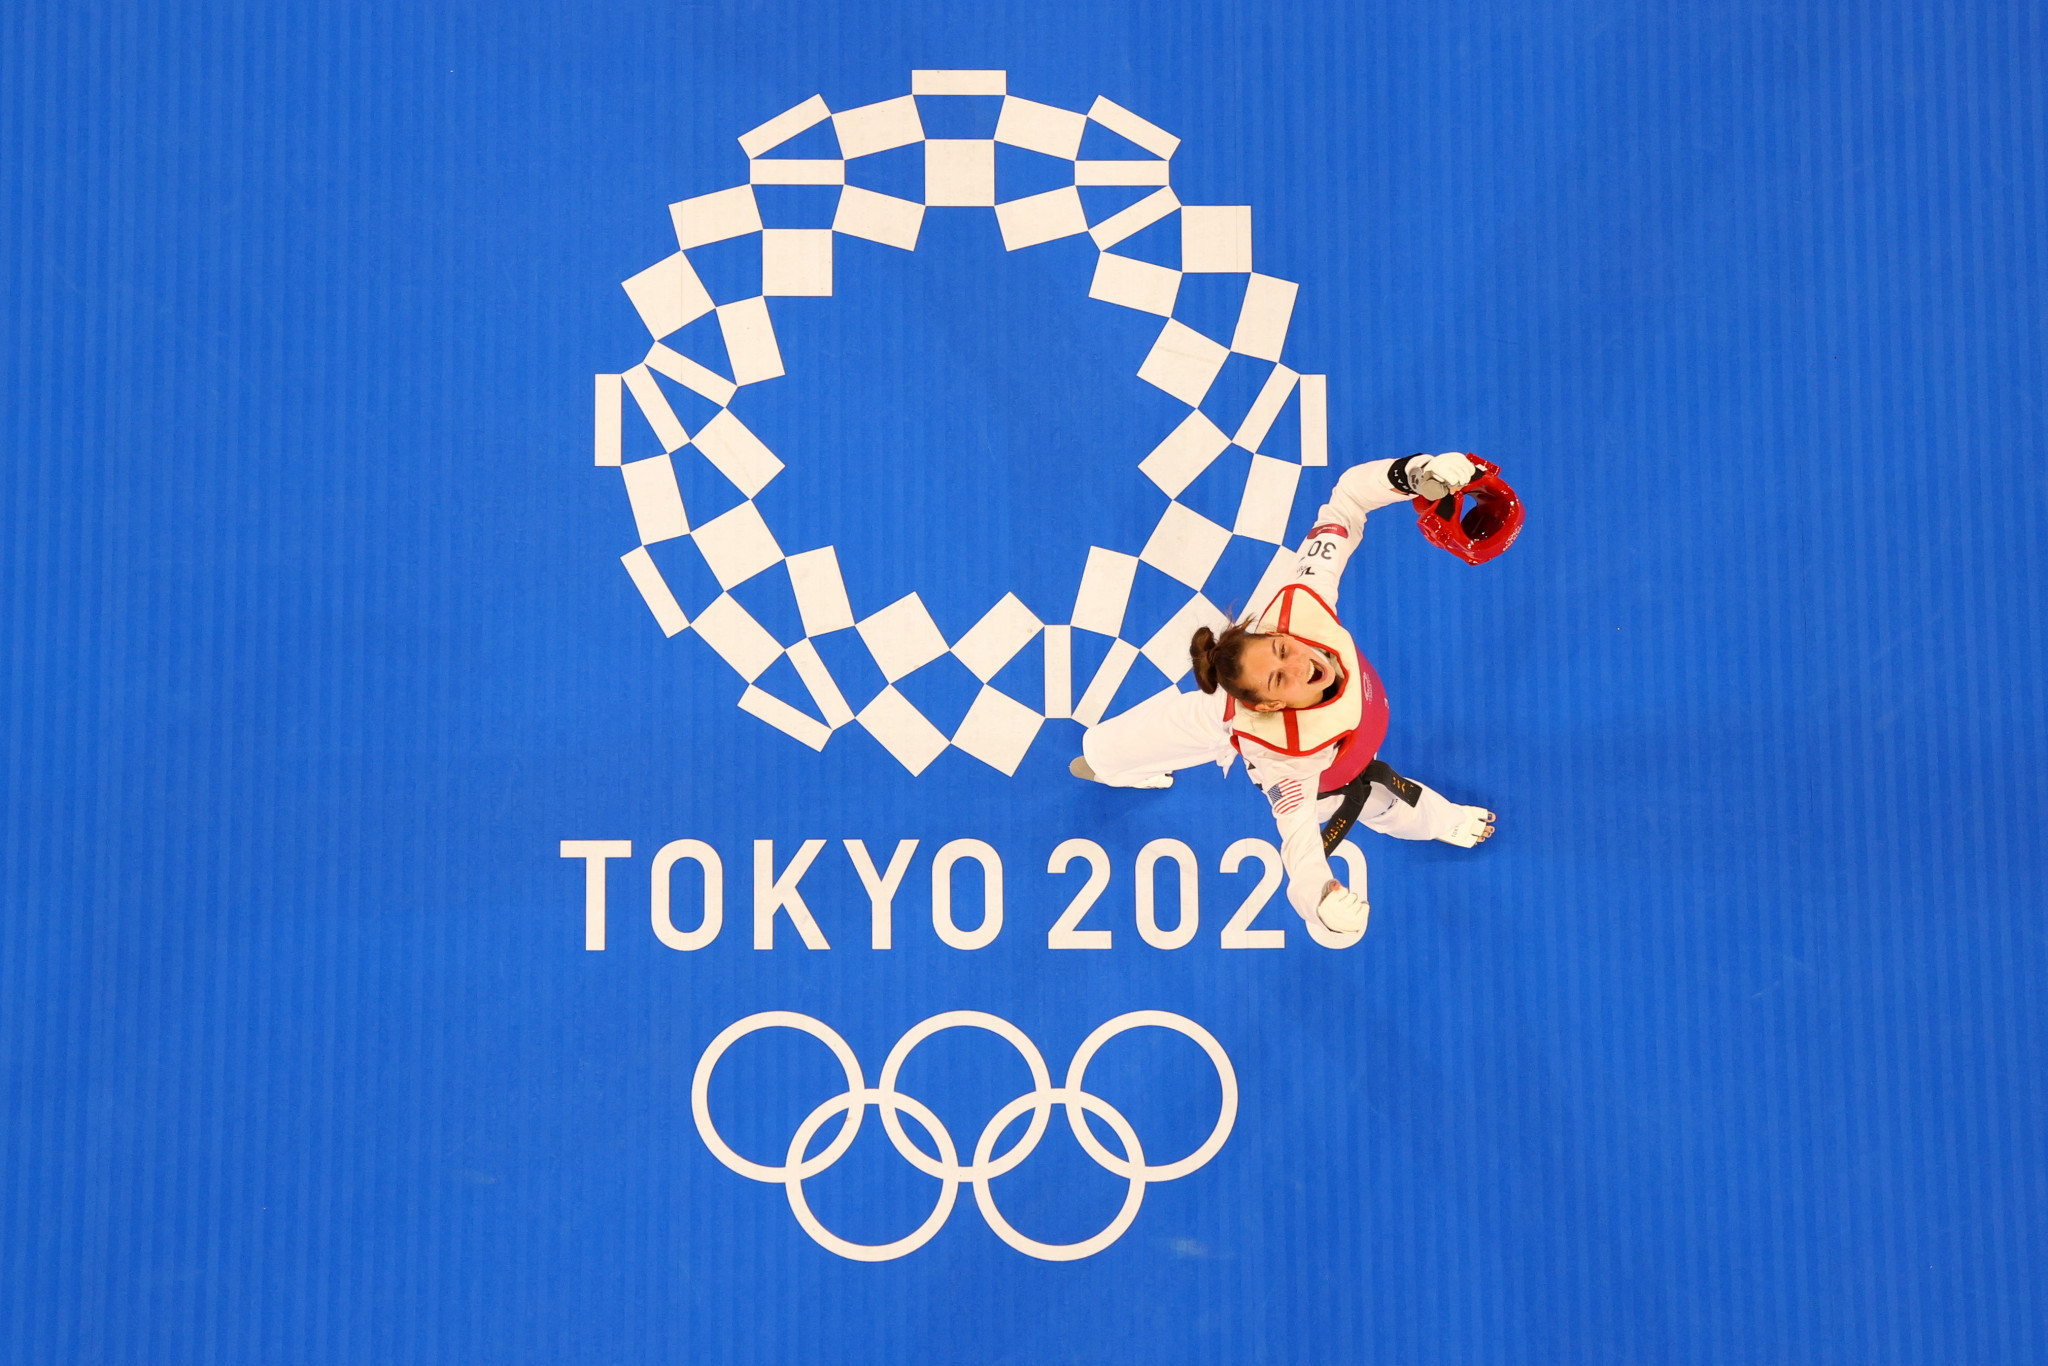 Tokyo 2020 was able to deliver a sense of courage and hope to people around the world by uniting a society divided by issues such as the pandemic ©Getty Images  